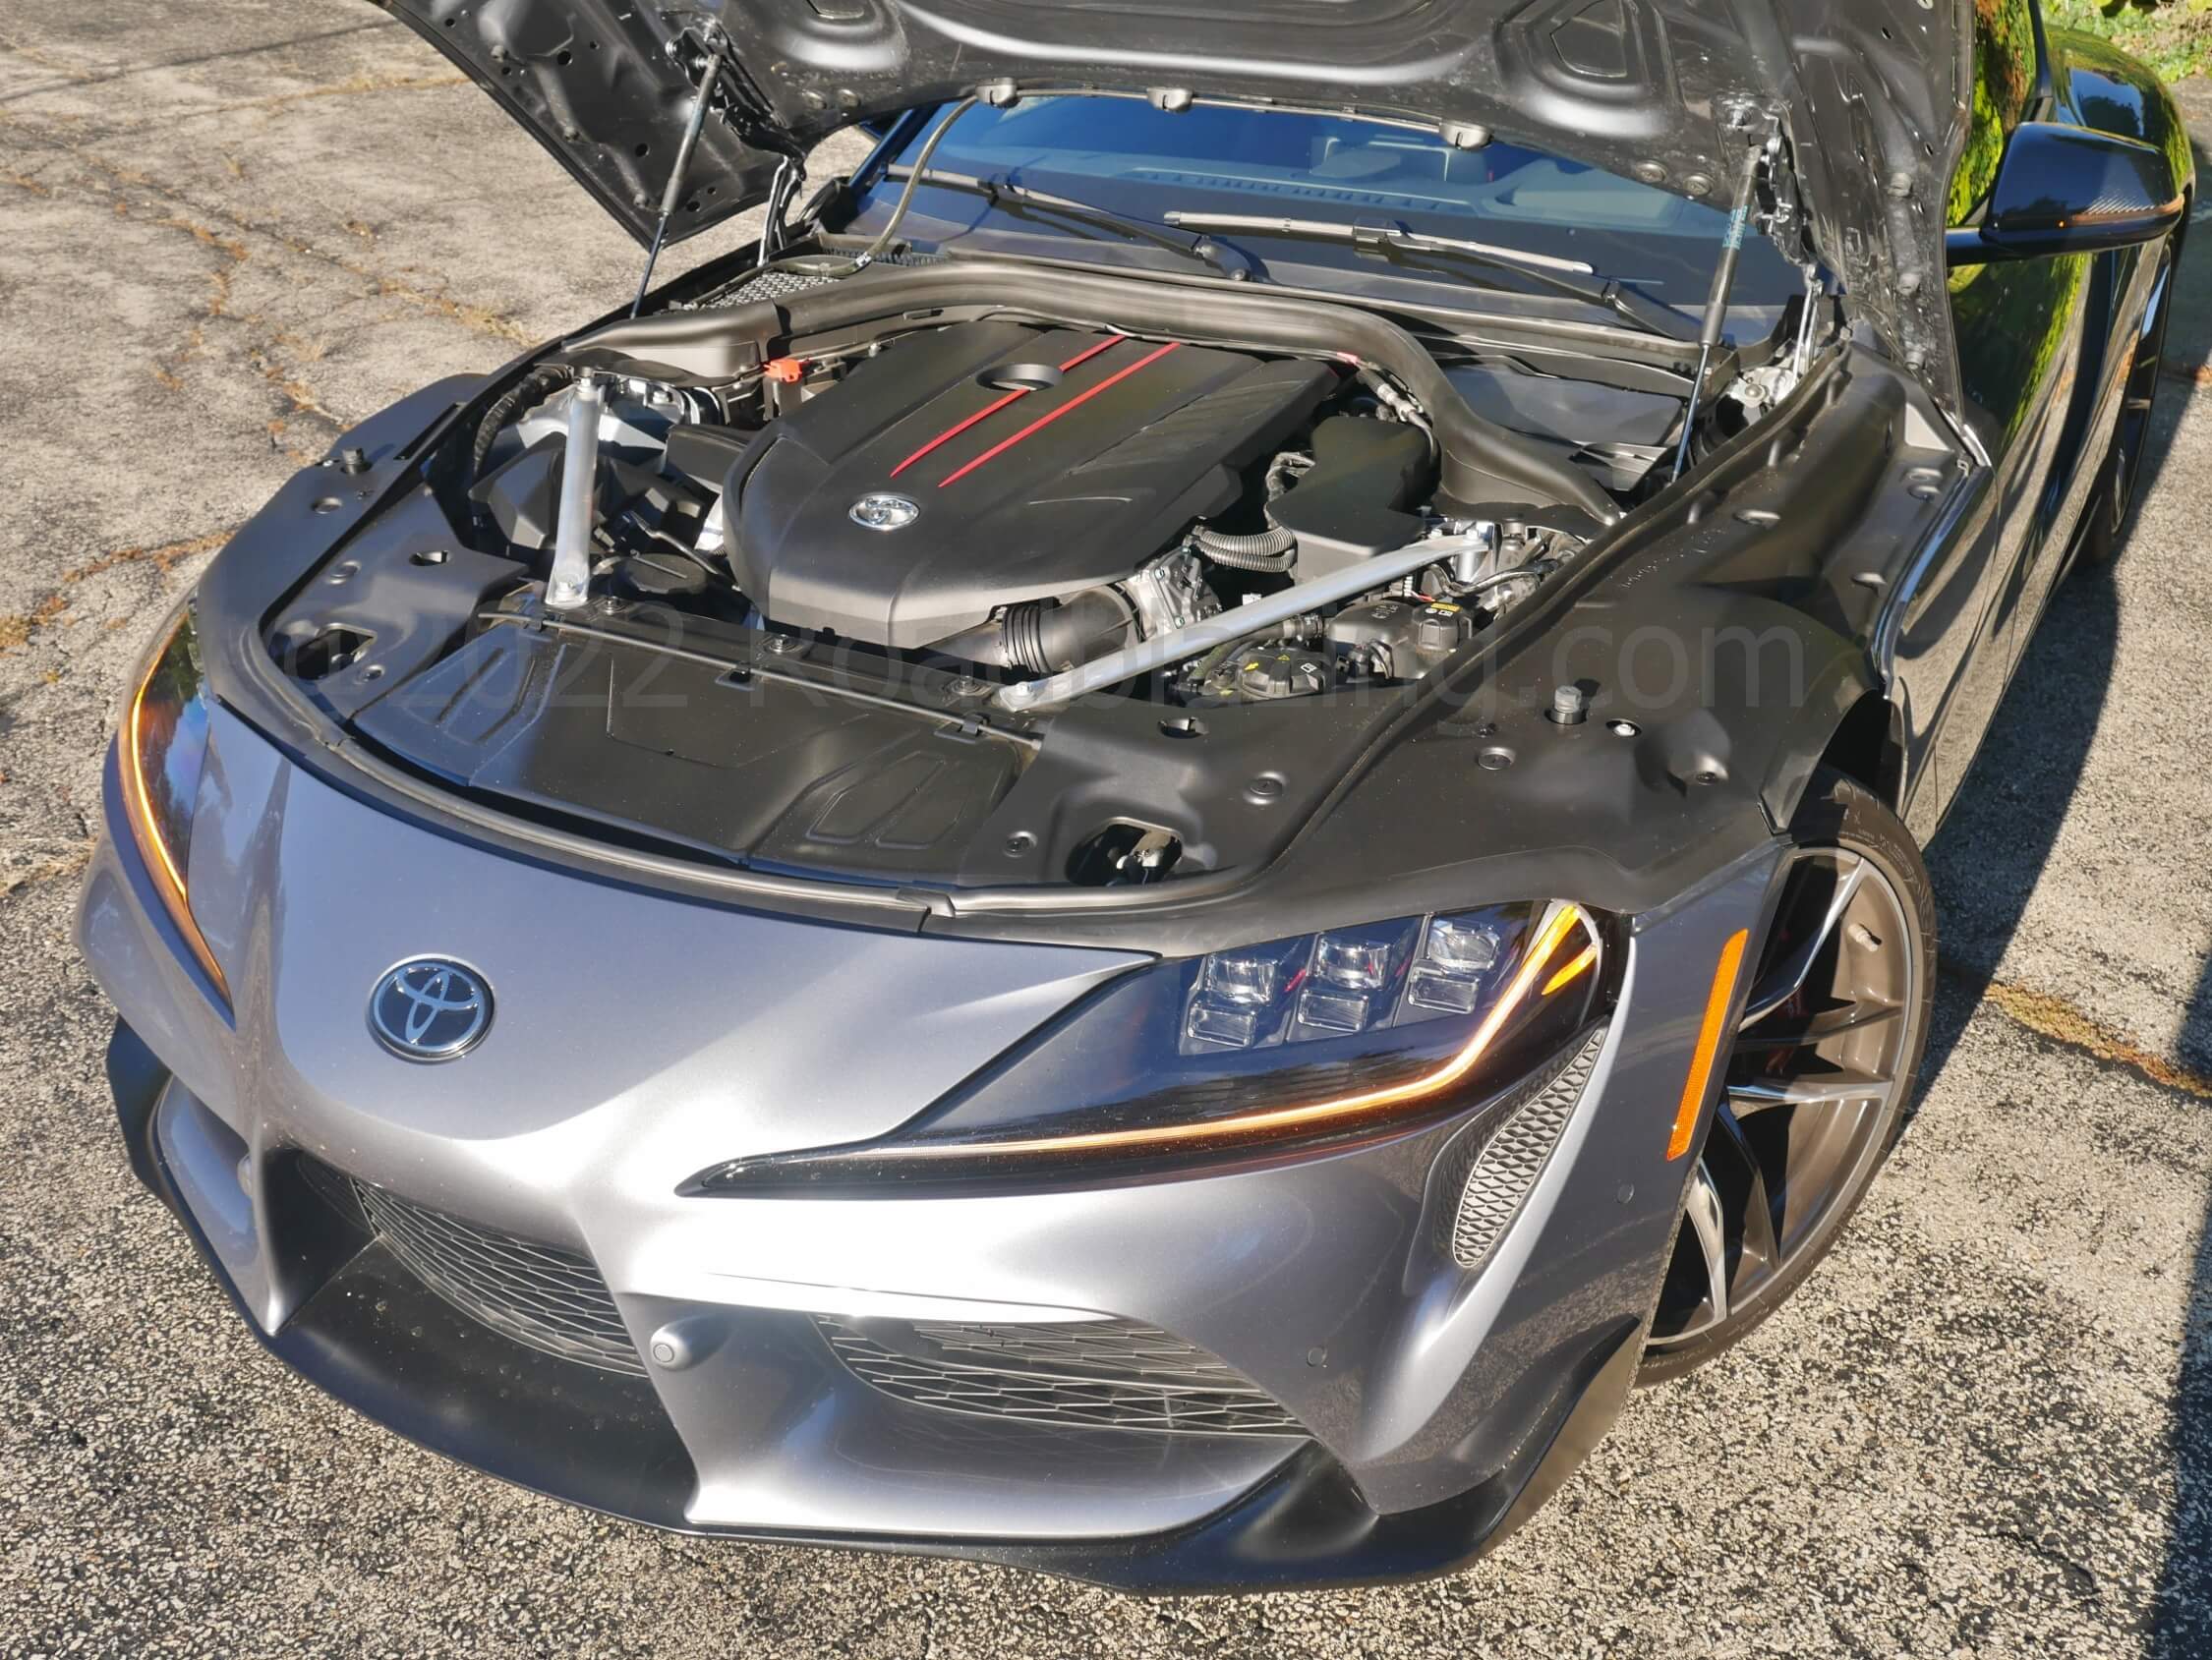 2022 Toyota GR Supra 3.0T: B58B30O1 twin-scroll turbo I-6 mated to the swift swapping ZF 8-spd autobox delivers a paradox of silky brutality